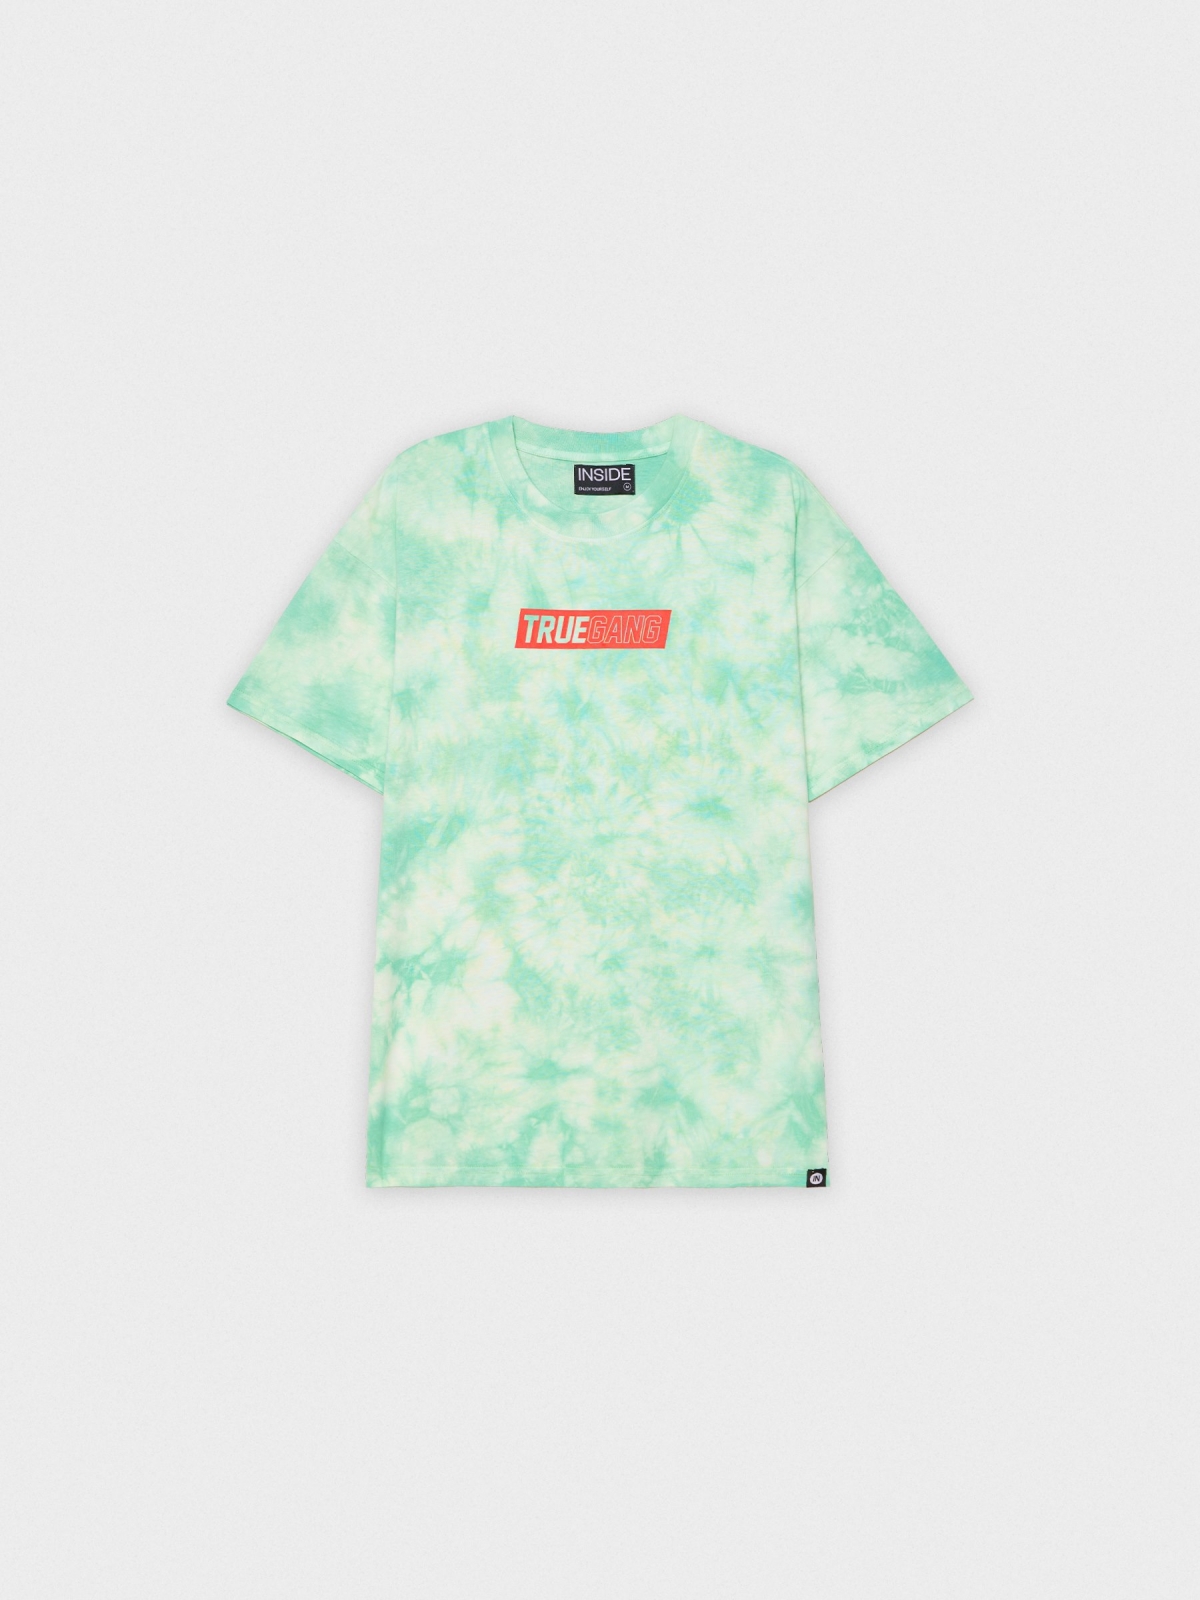  Tie&dye t-shirt with text white